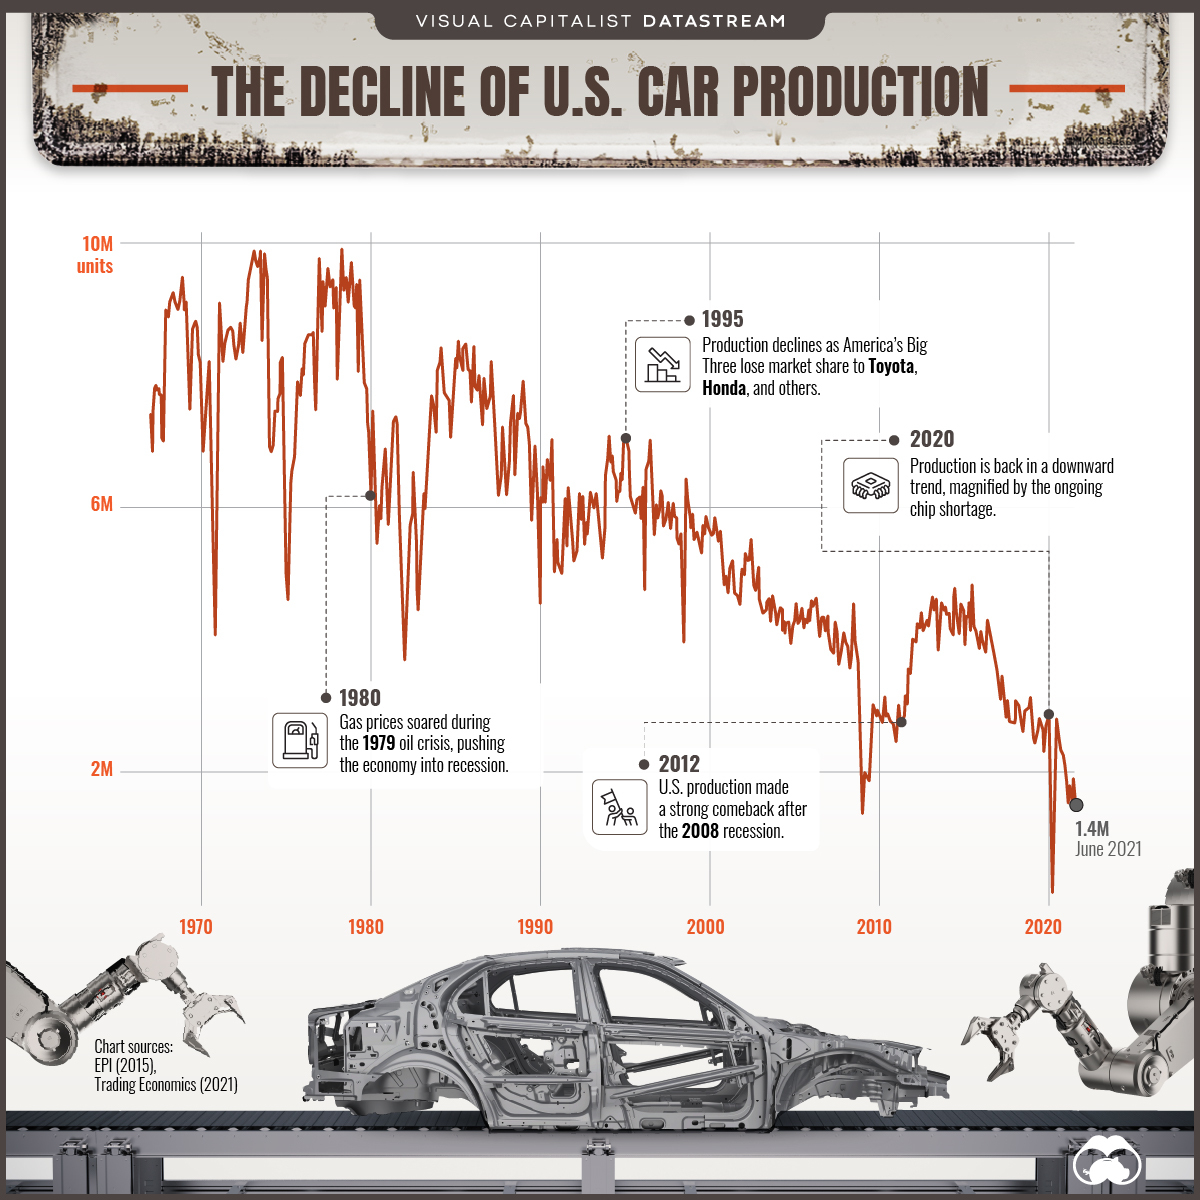 US Car Production Declining Over Several Decades